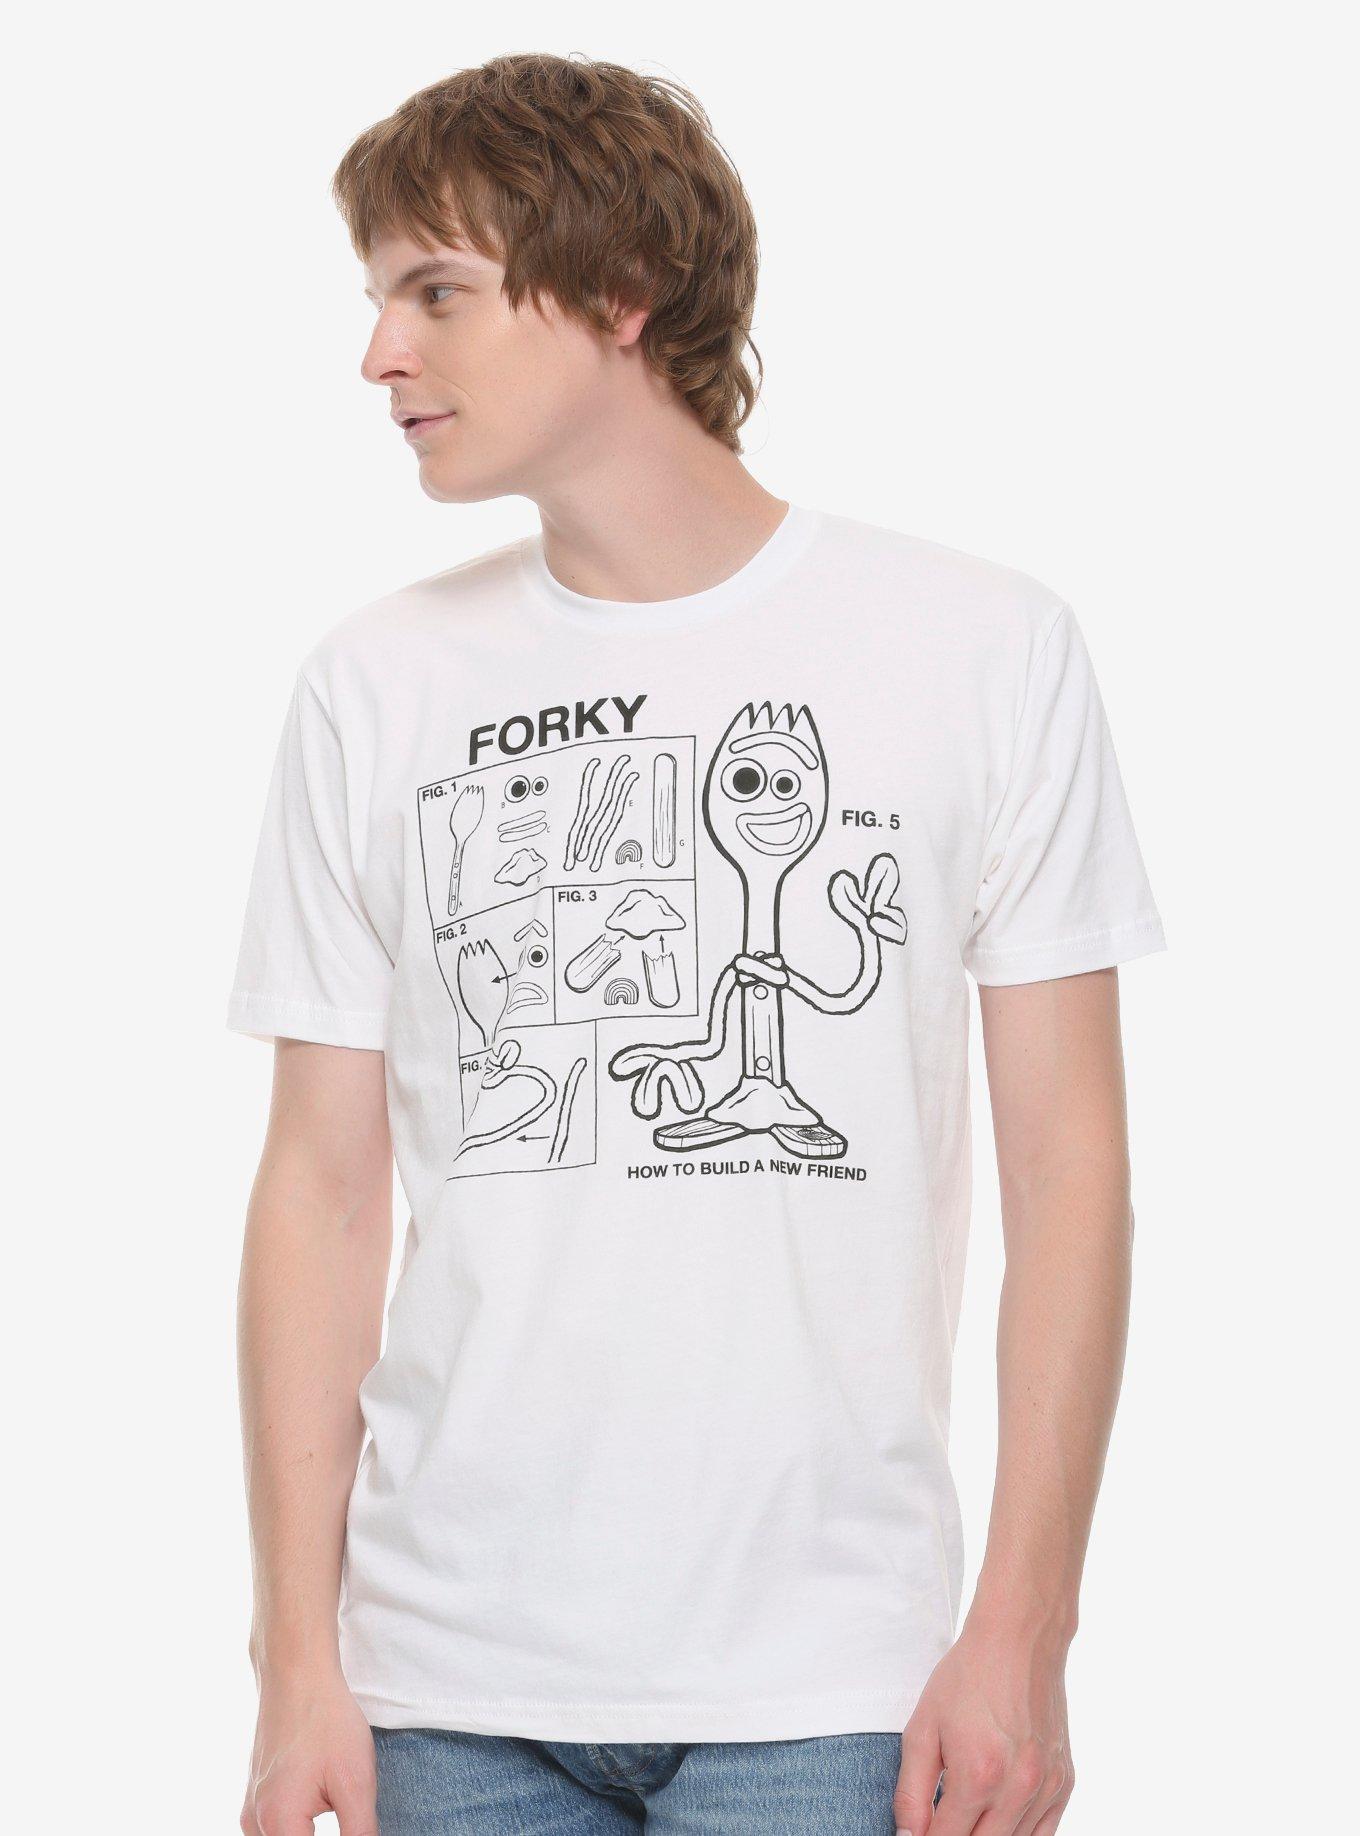 Disney Pixar Toy Story 4 Forky Build a Friend T-Shirt | BoxLunch